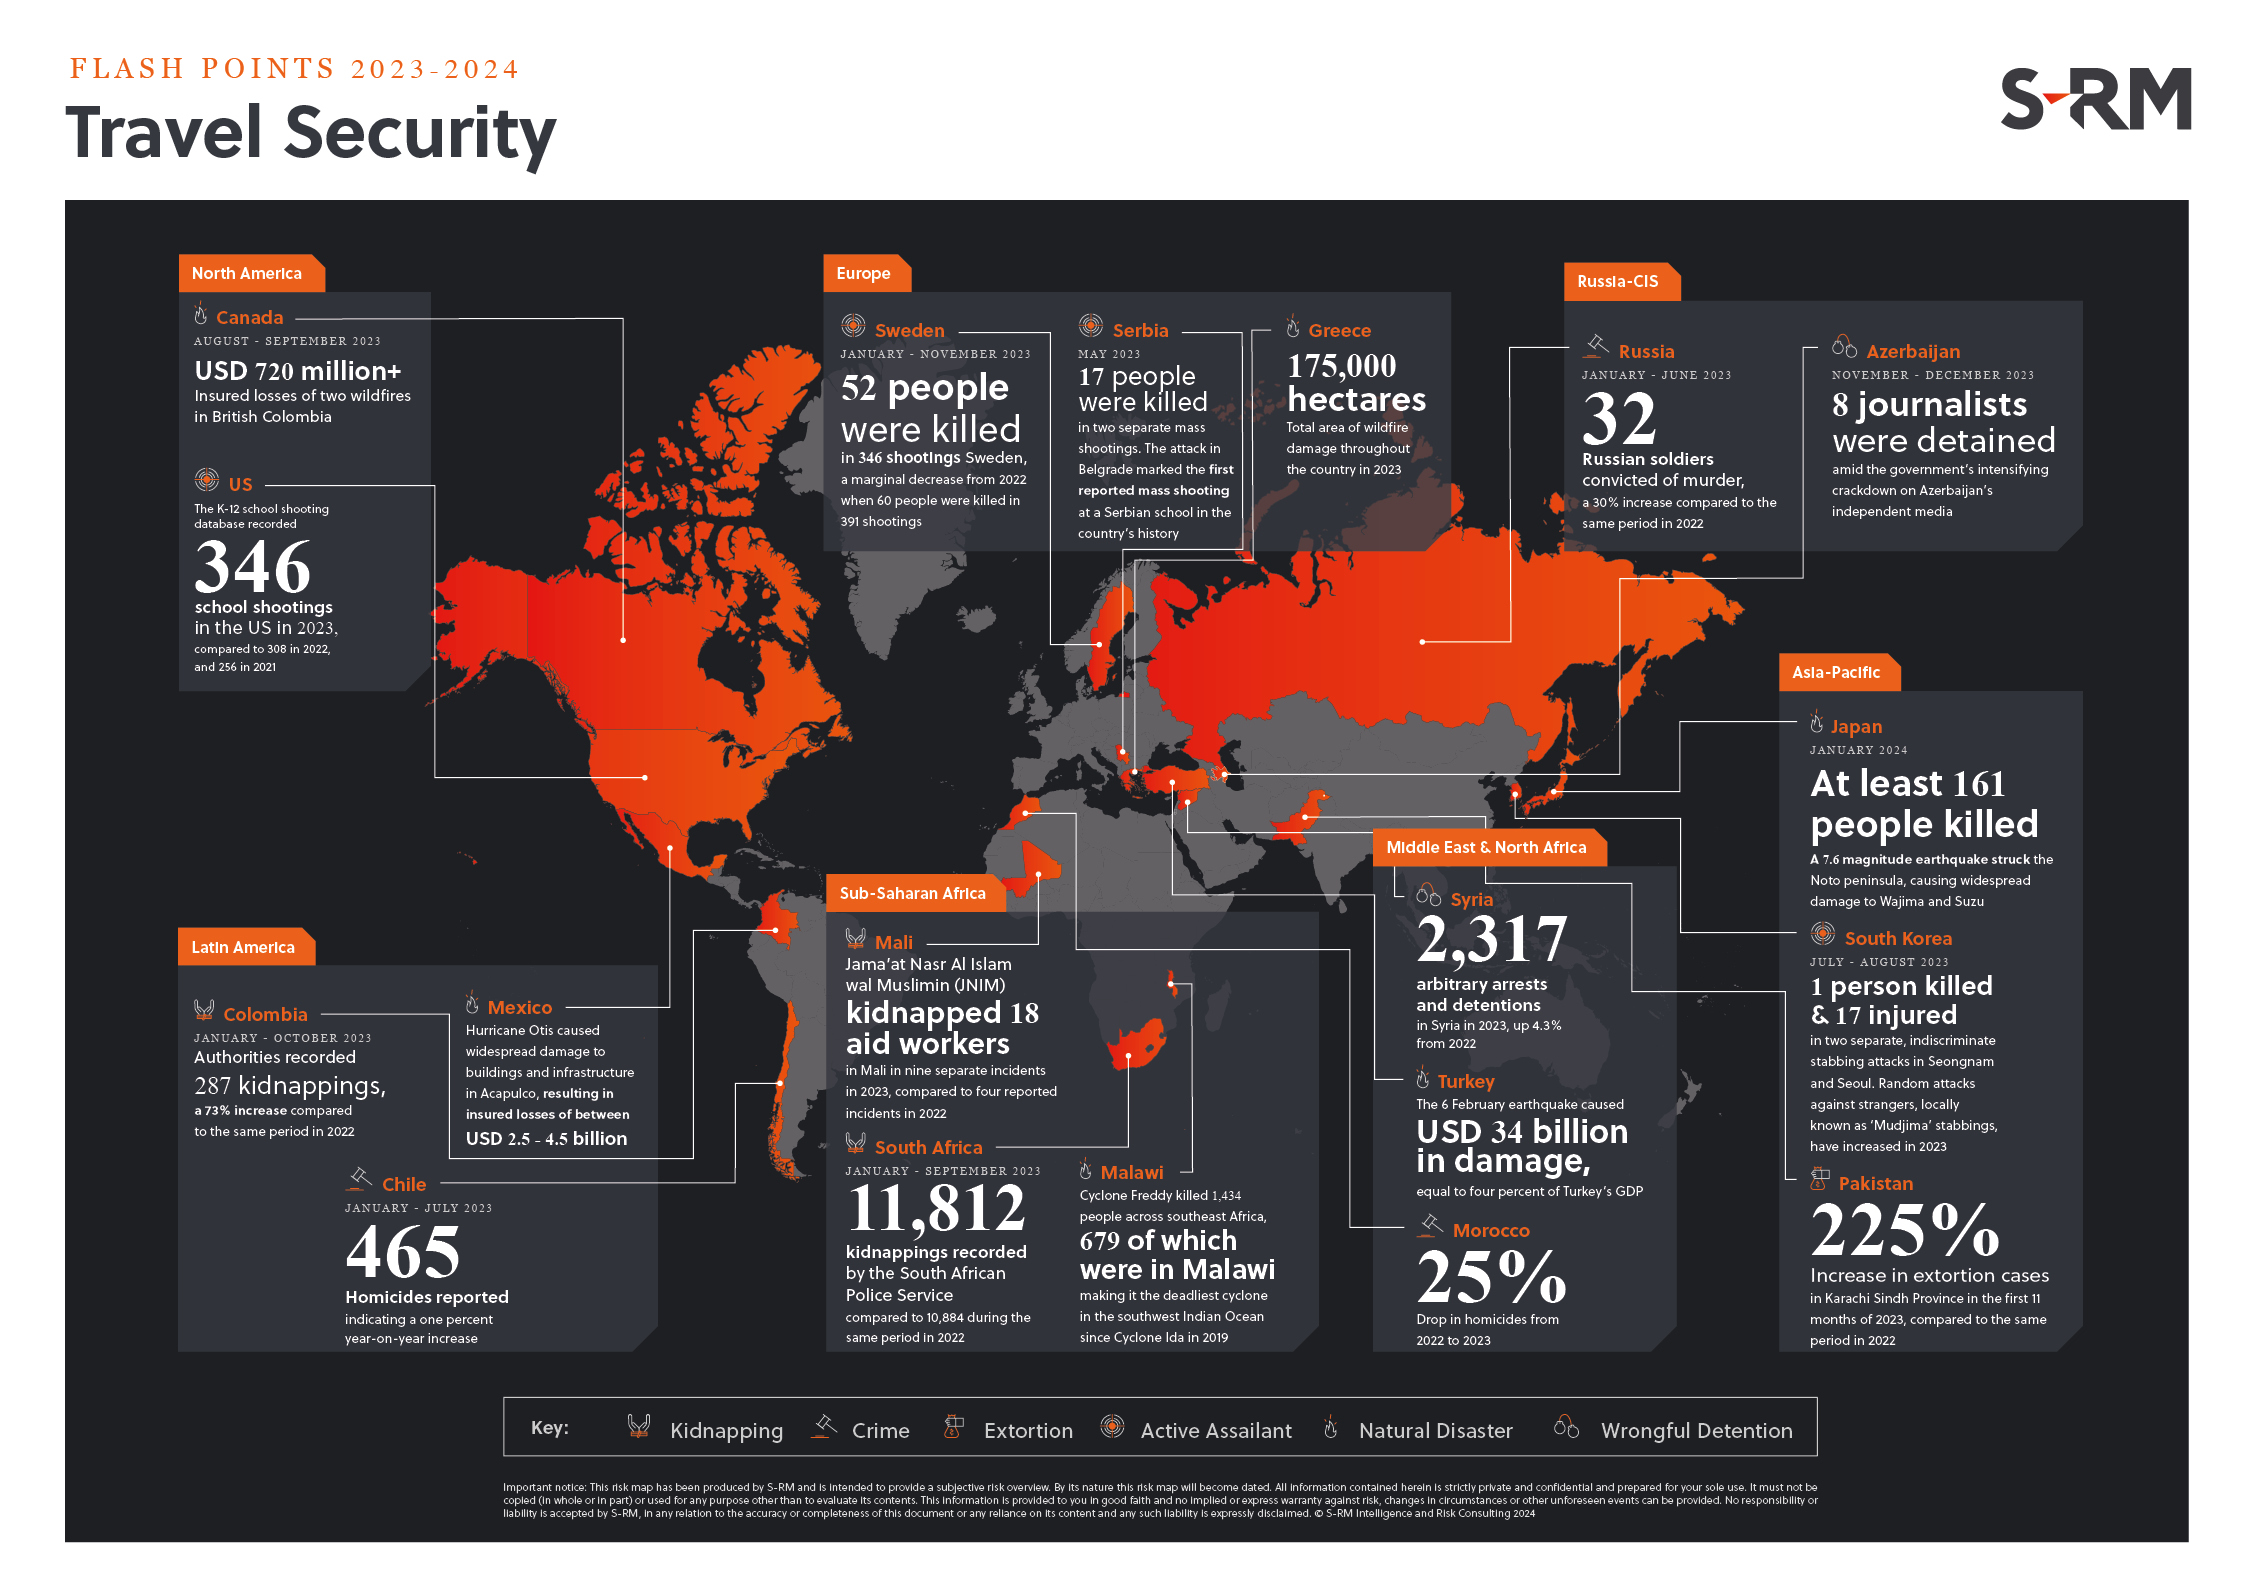 Travel Security Flash Points 2024